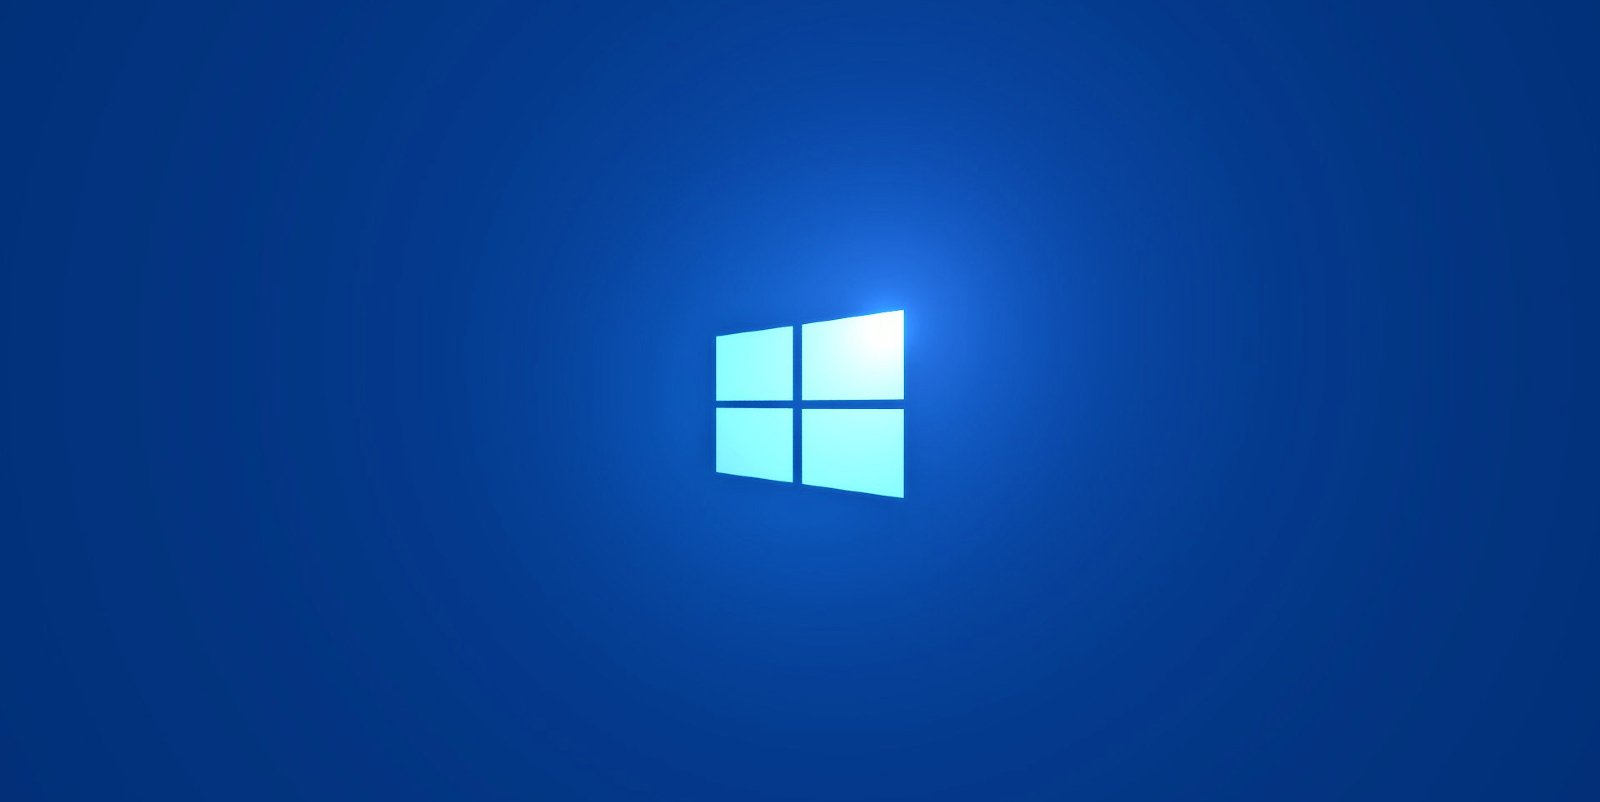 Microsoft: Windows 10 1909 reaches end of service in May